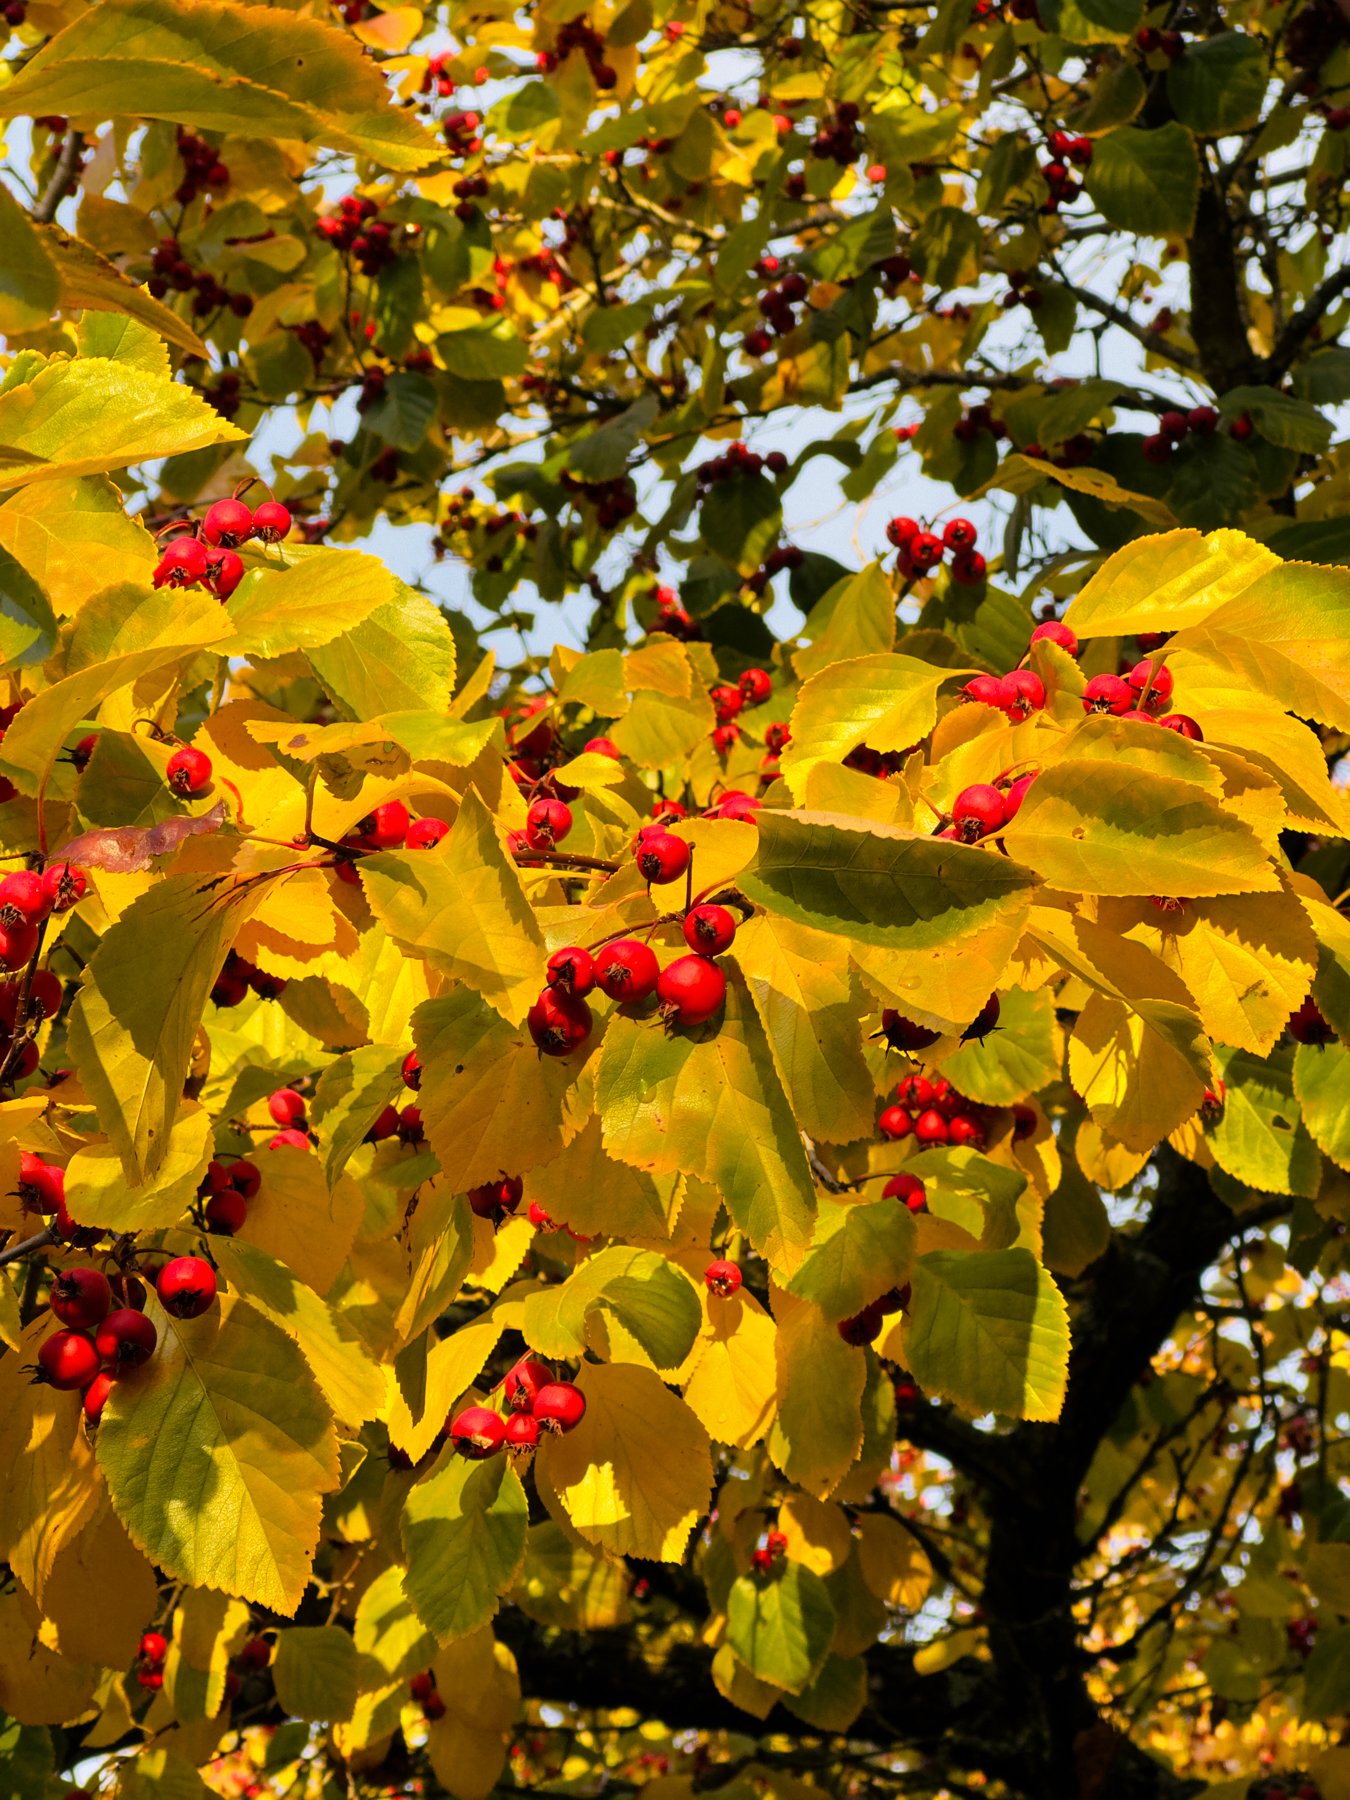 An up close view of a tree branch with yellow green leaves and bright red berries.